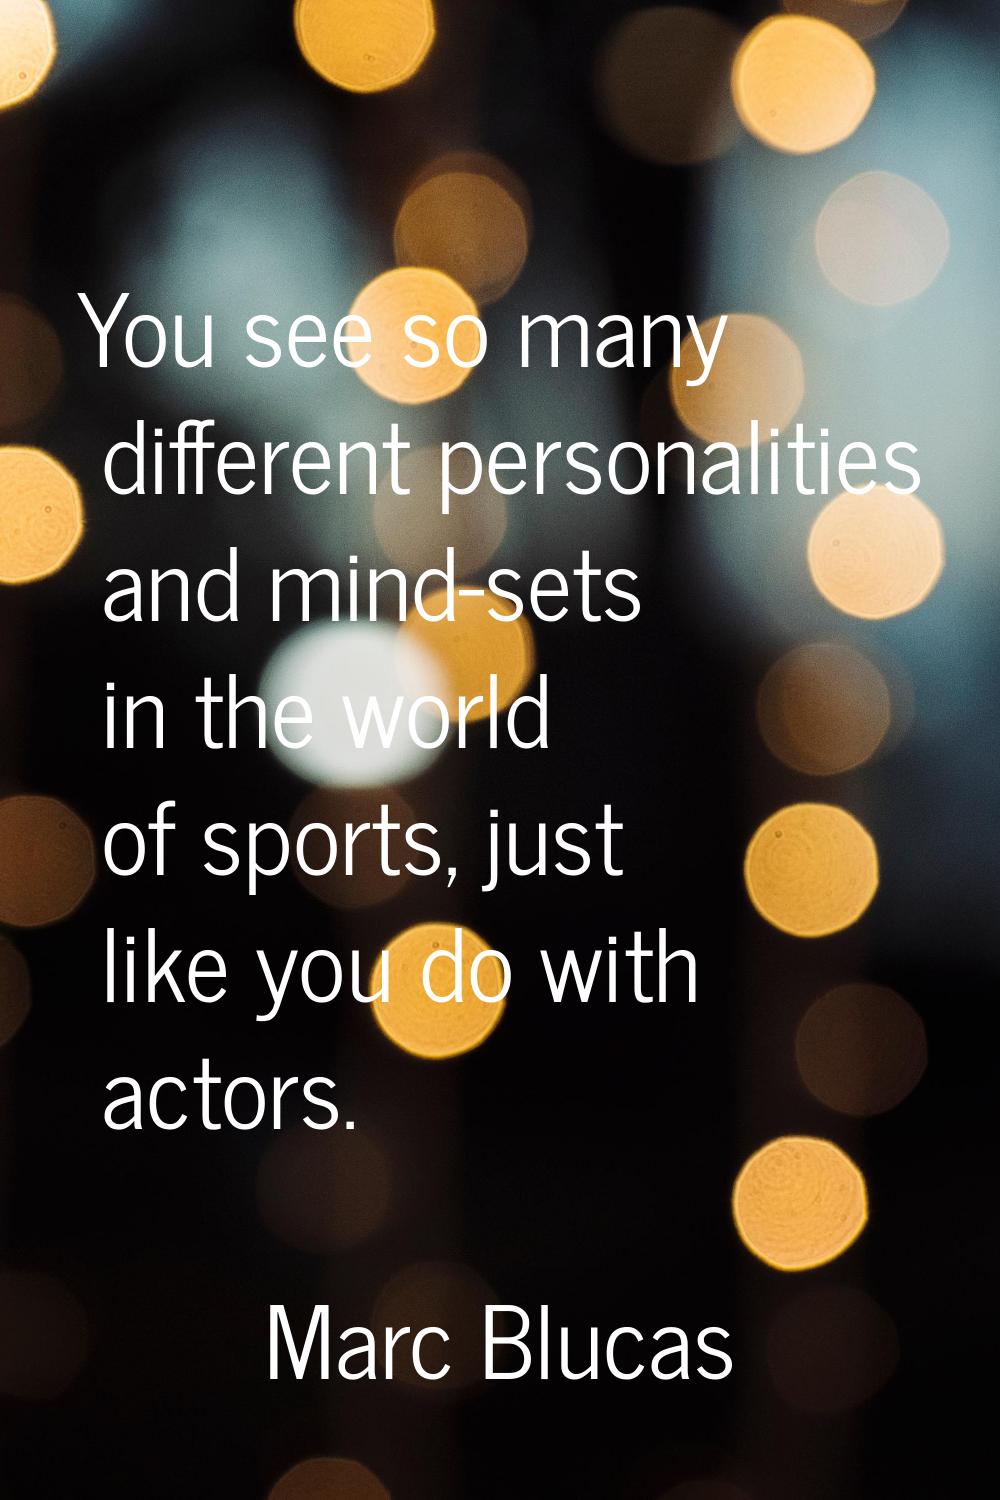 You see so many different personalities and mind-sets in the world of sports, just like you do with